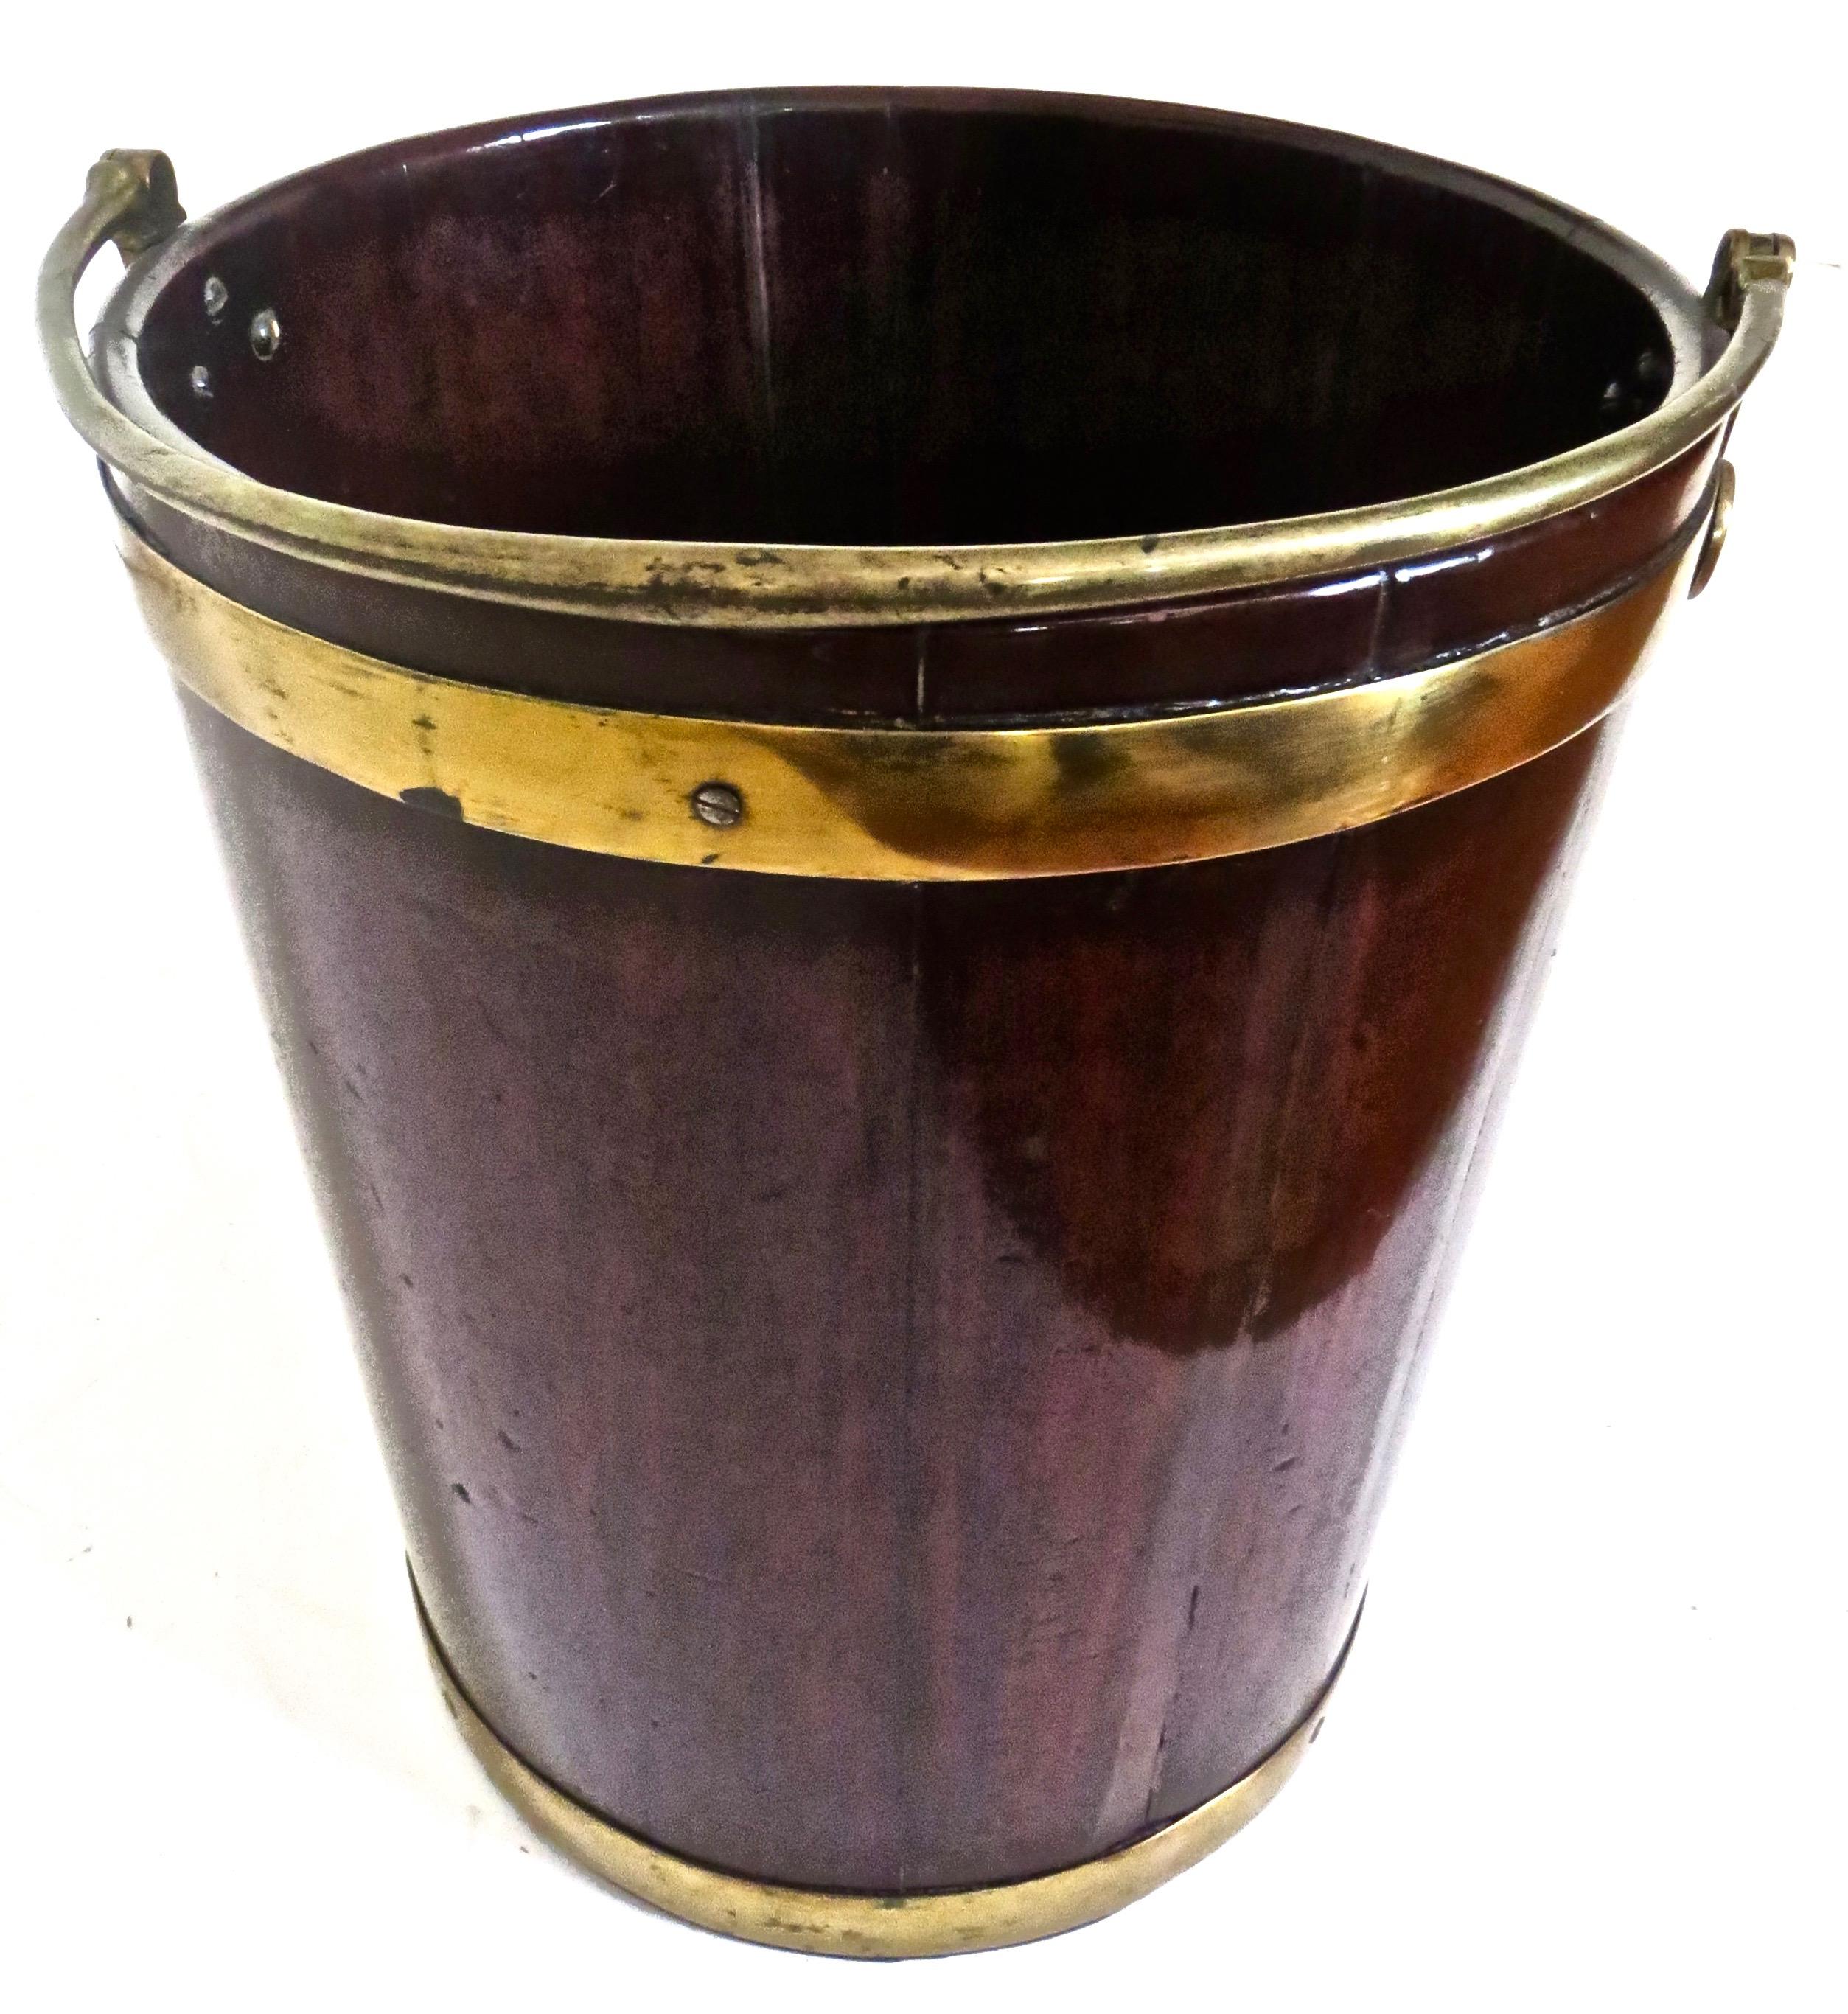 Pair of George III Mahogany Brass-Bound Buckets; 1 Peat and 1 Plate, English 8